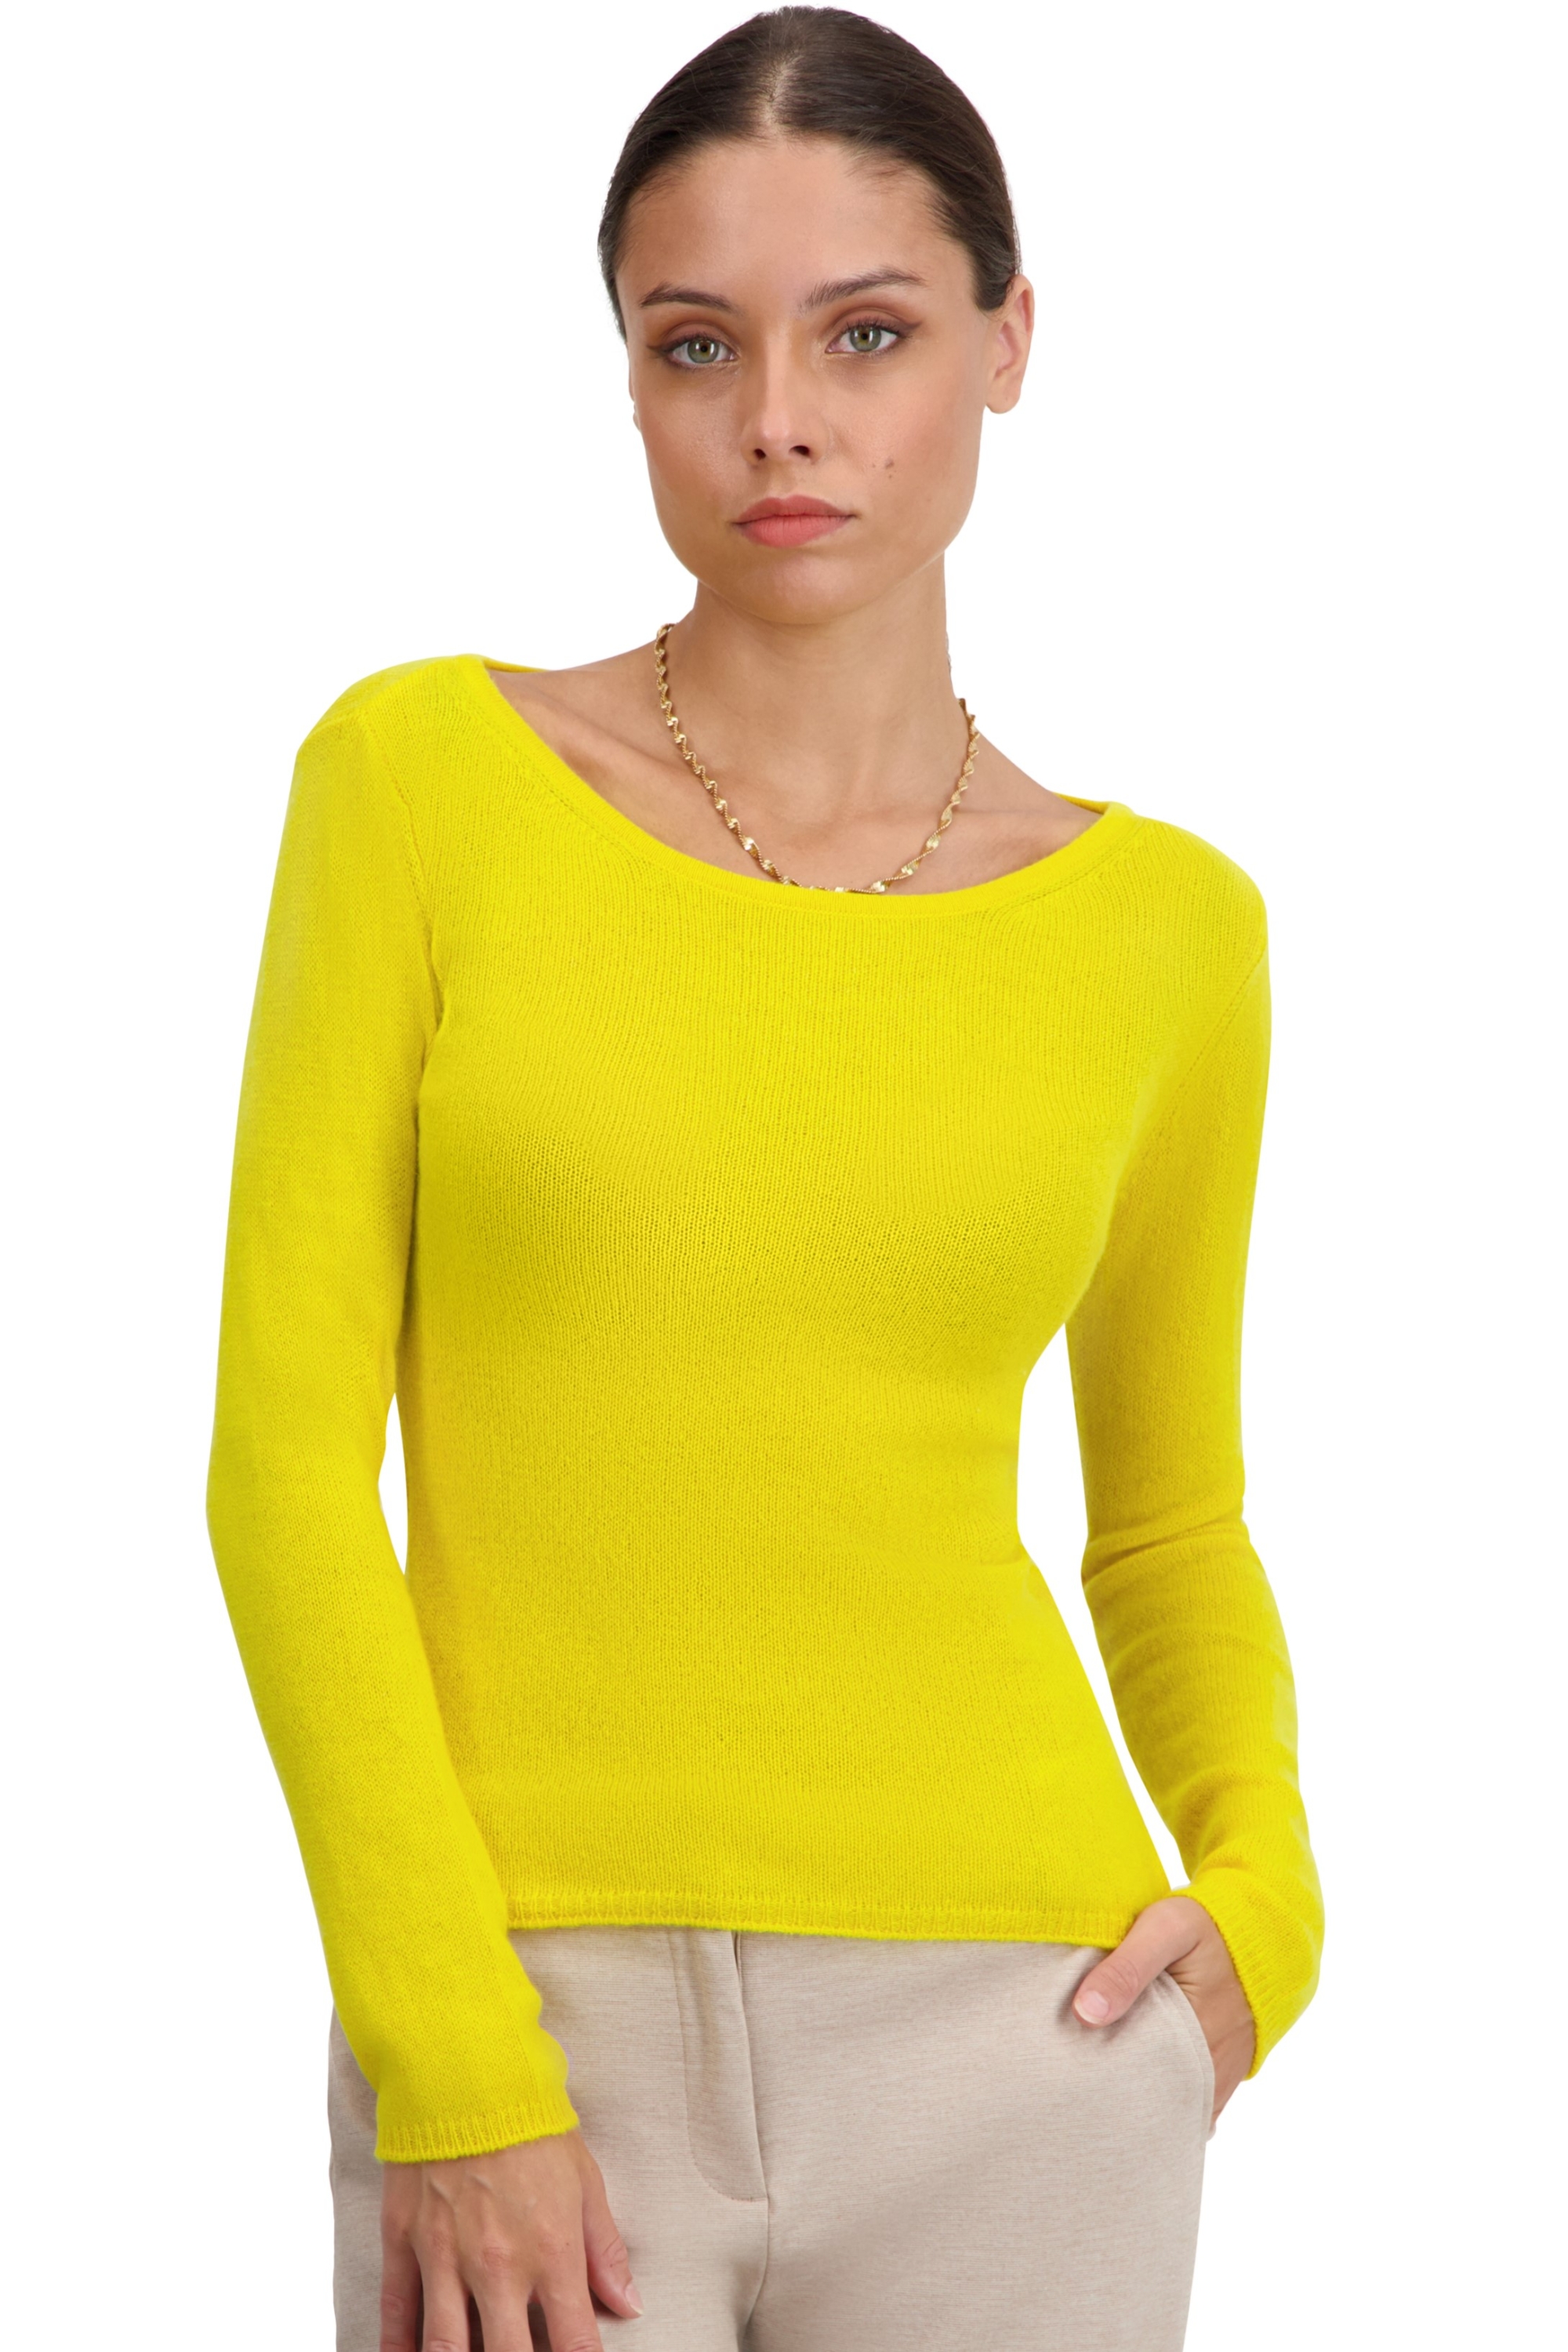 Cashmere ladies caleen cyber yellow 2xl